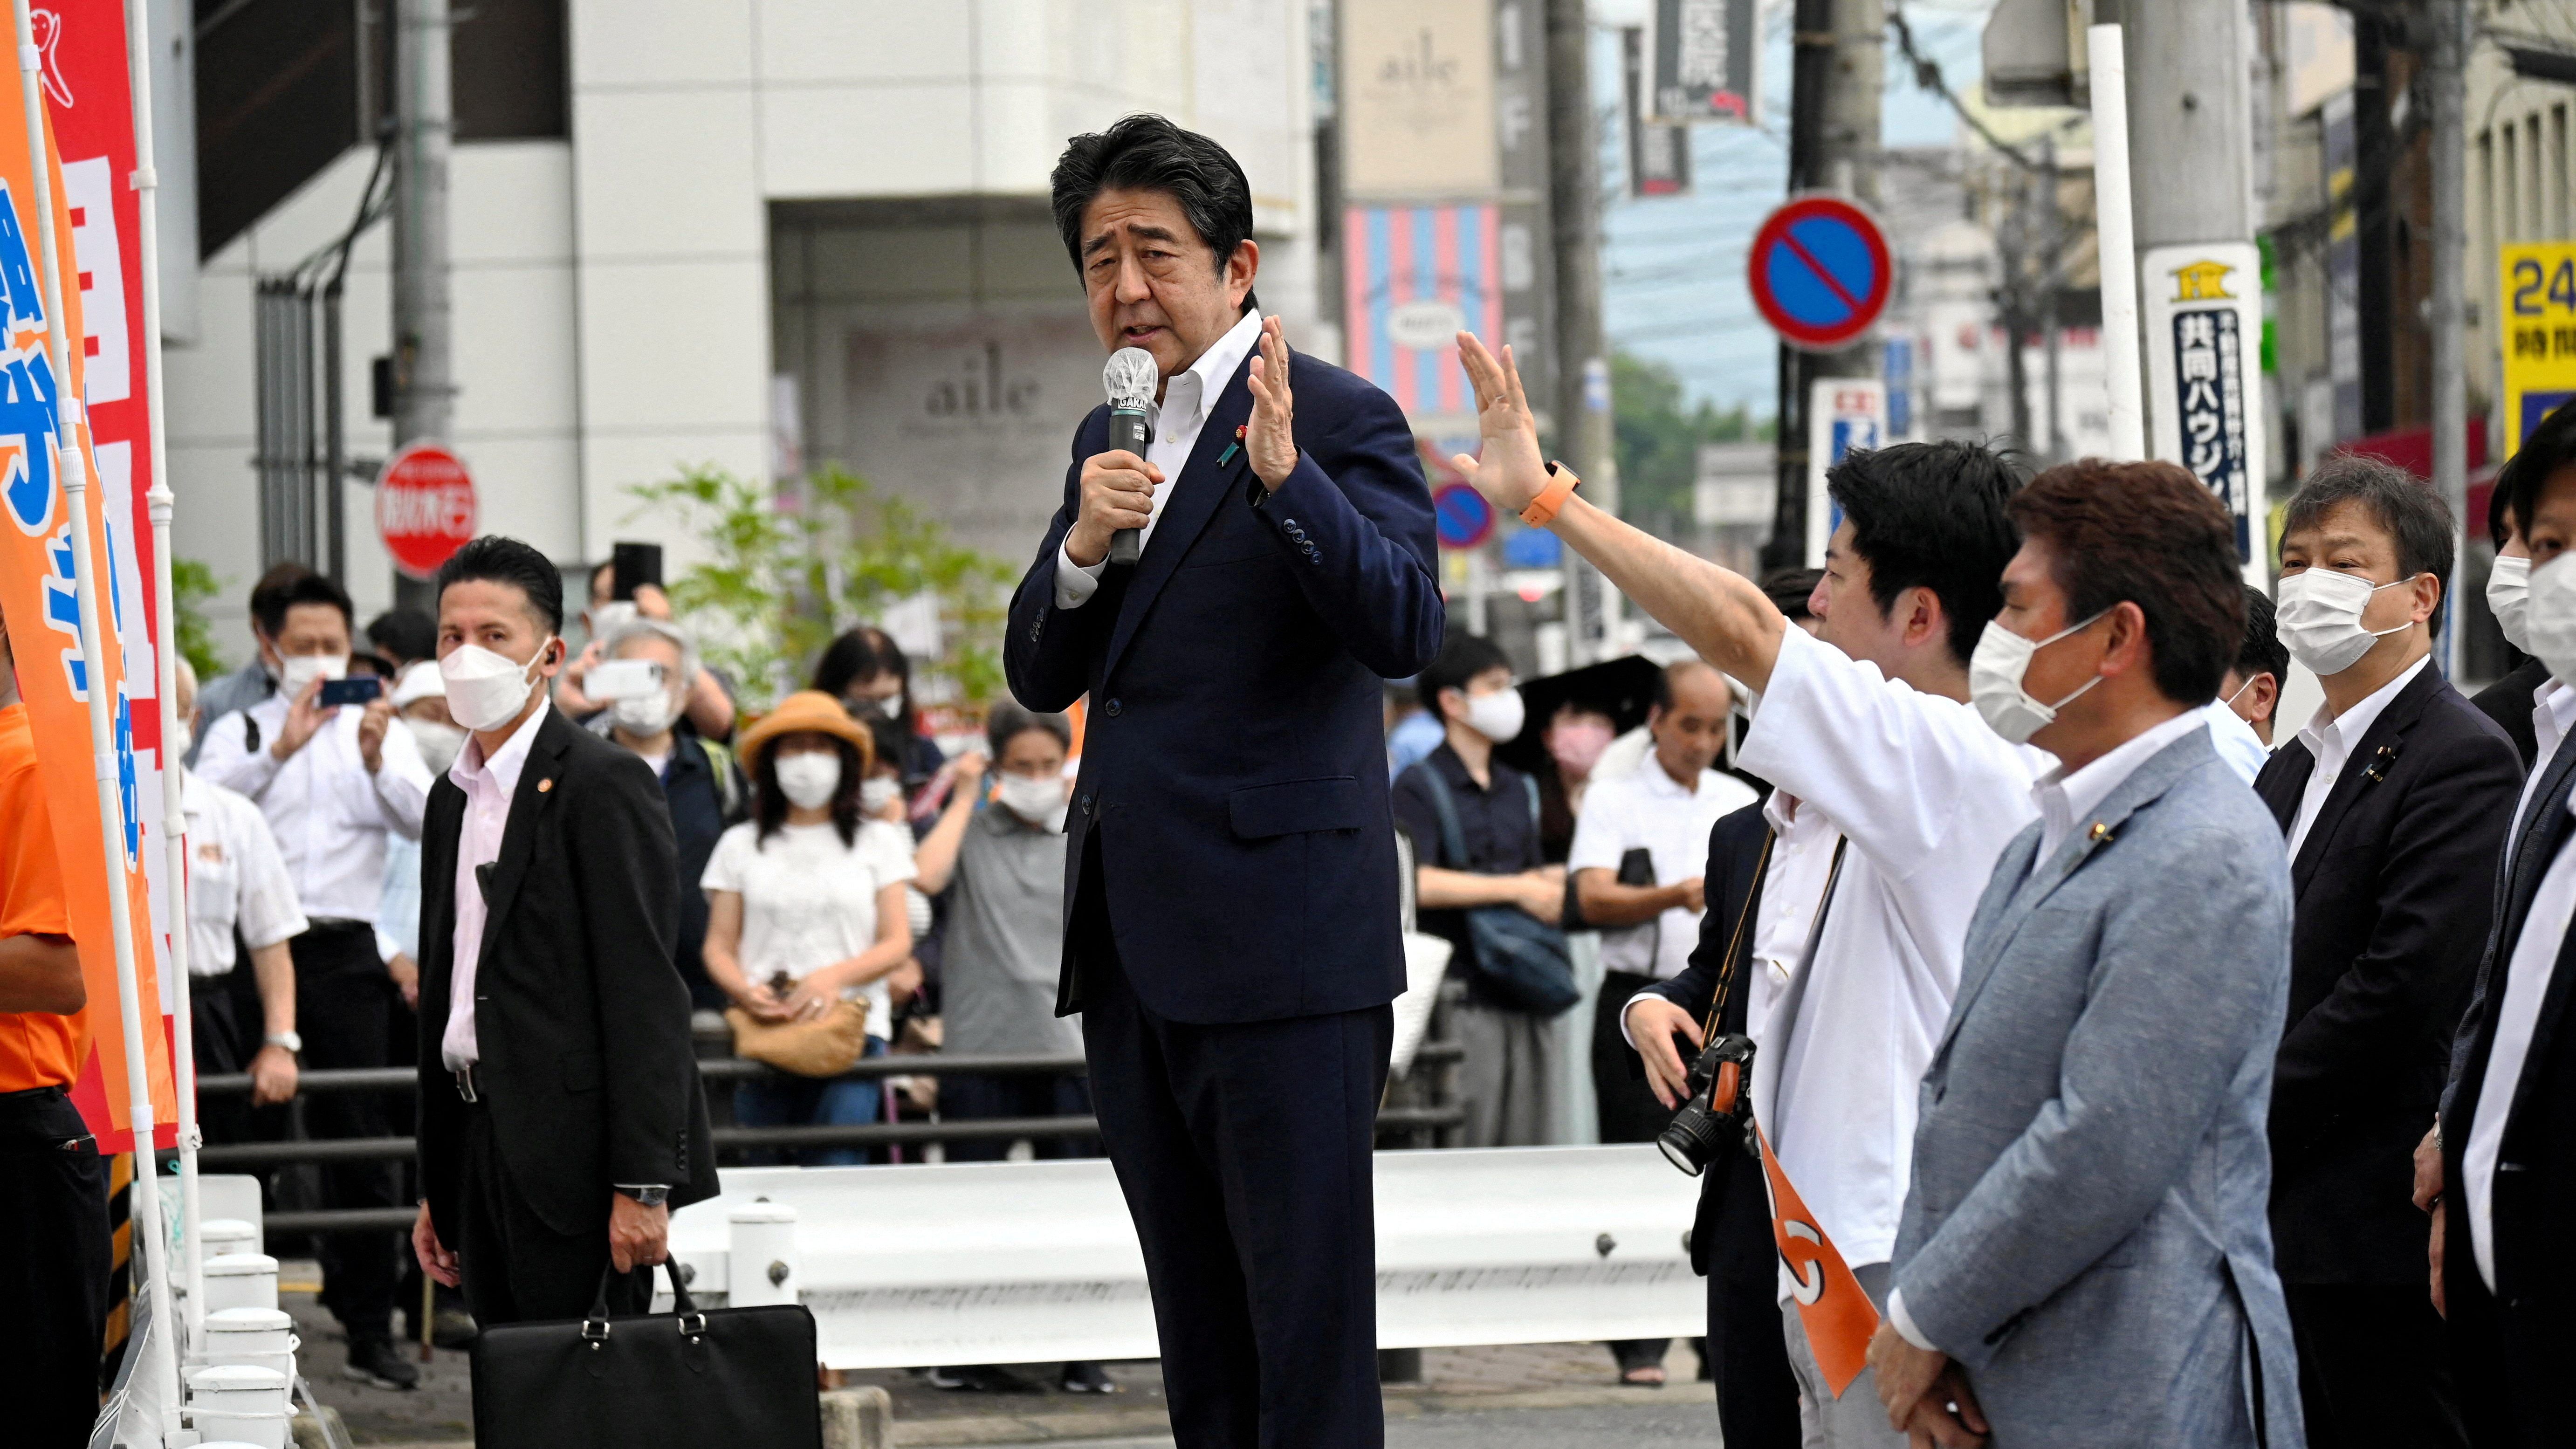 The local fire department's log released last week showed that first responders supposed Abe was in cardiac arrest within minutes of the shooting. Credit: Reuters 